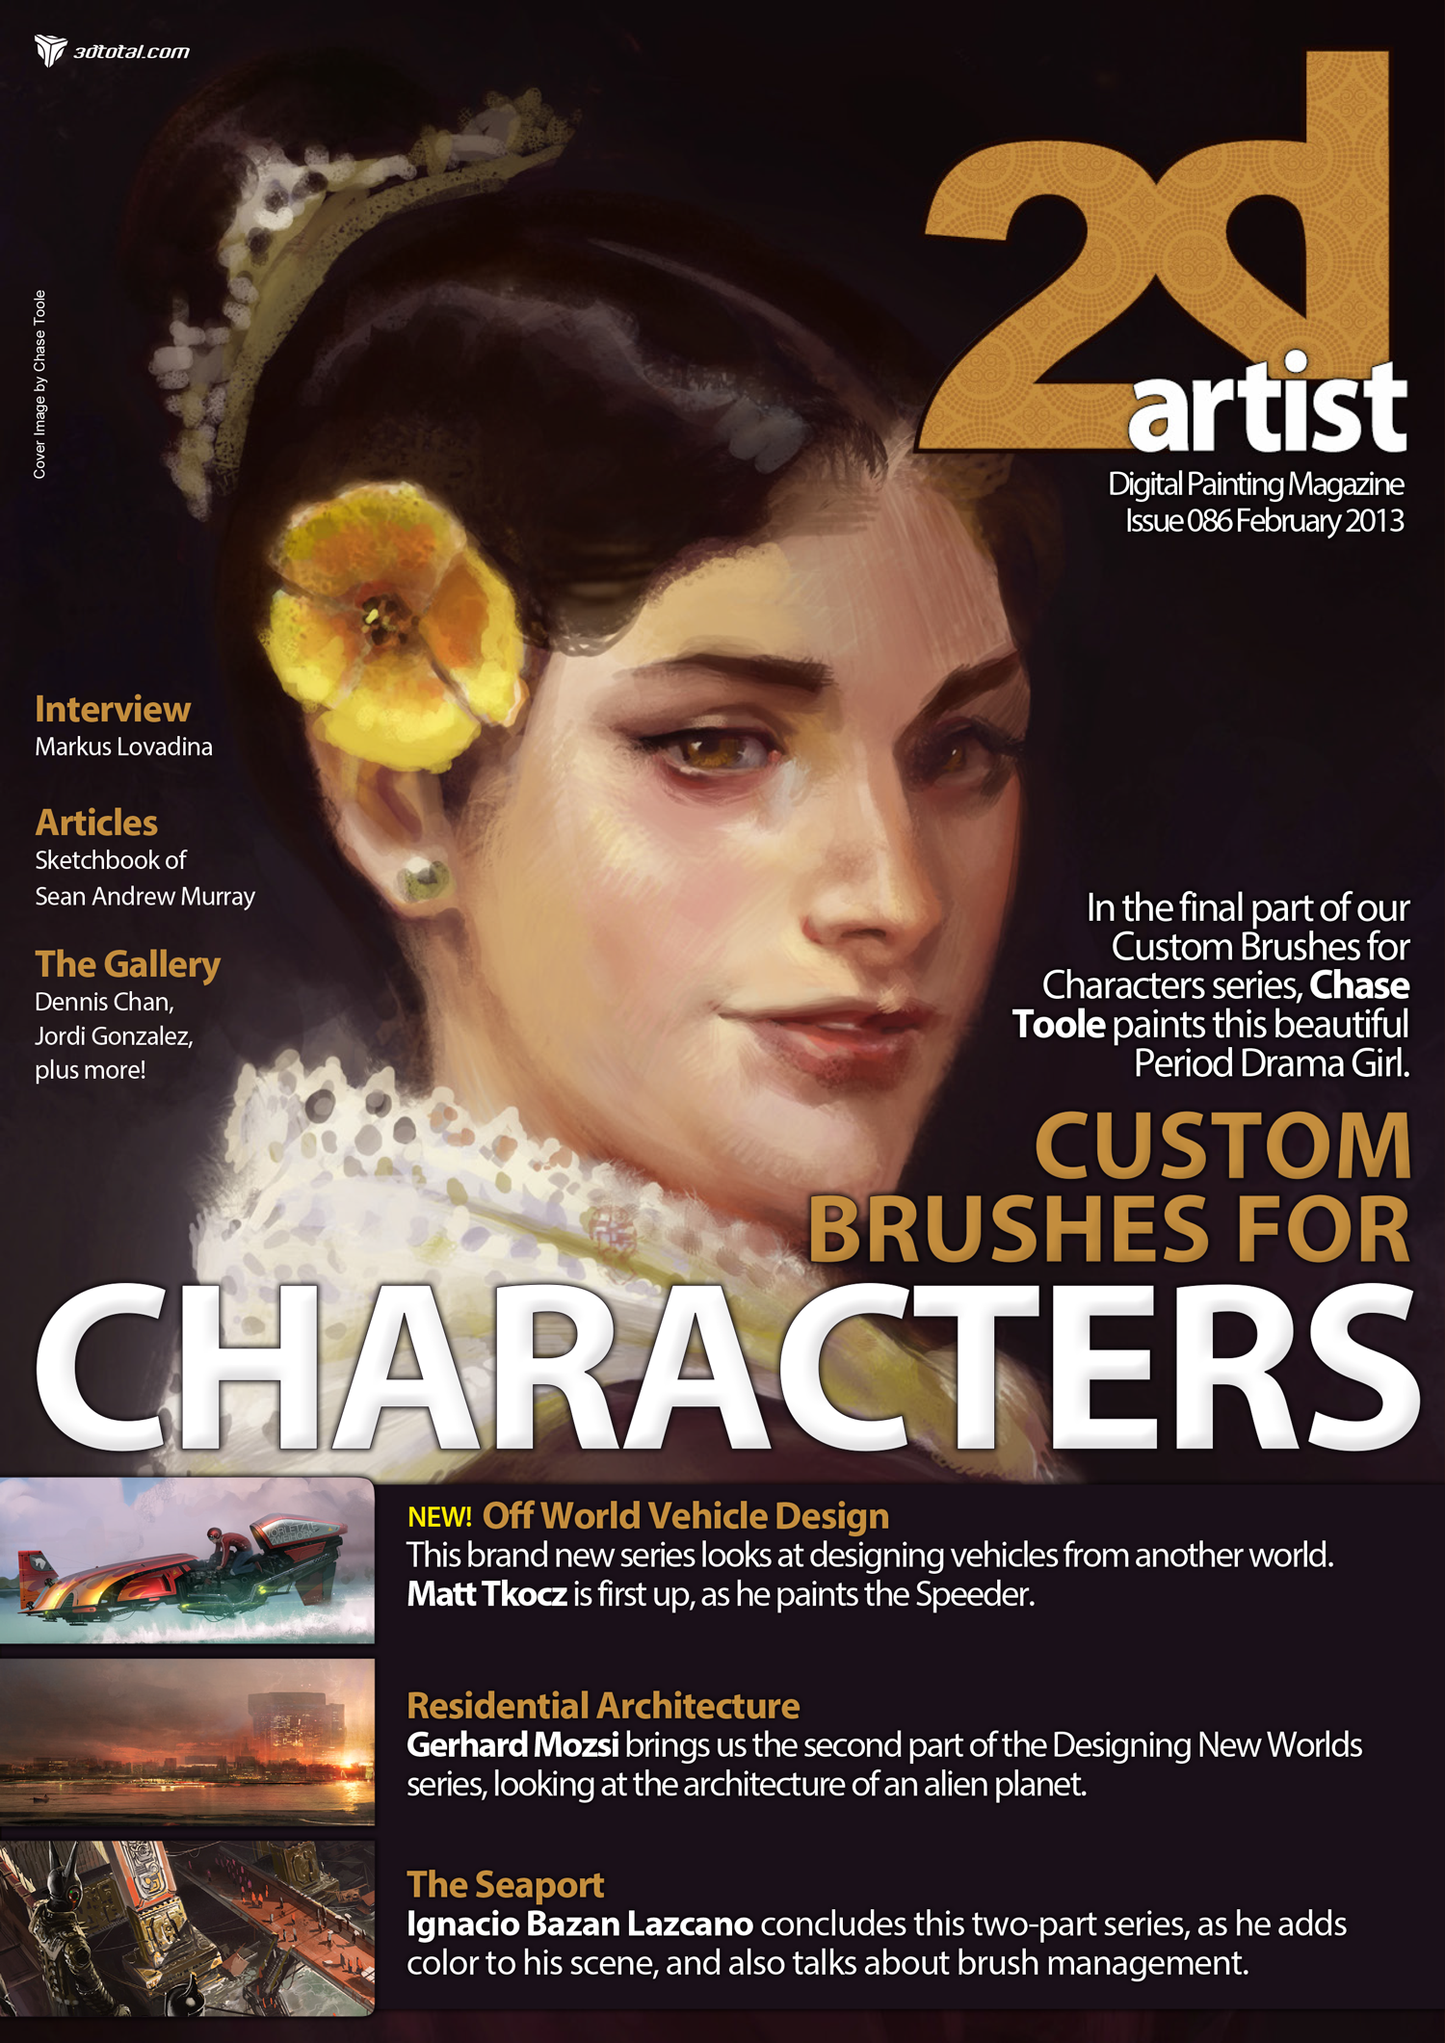 2DArtist: Issue 086 - February 2013 (Download Only)